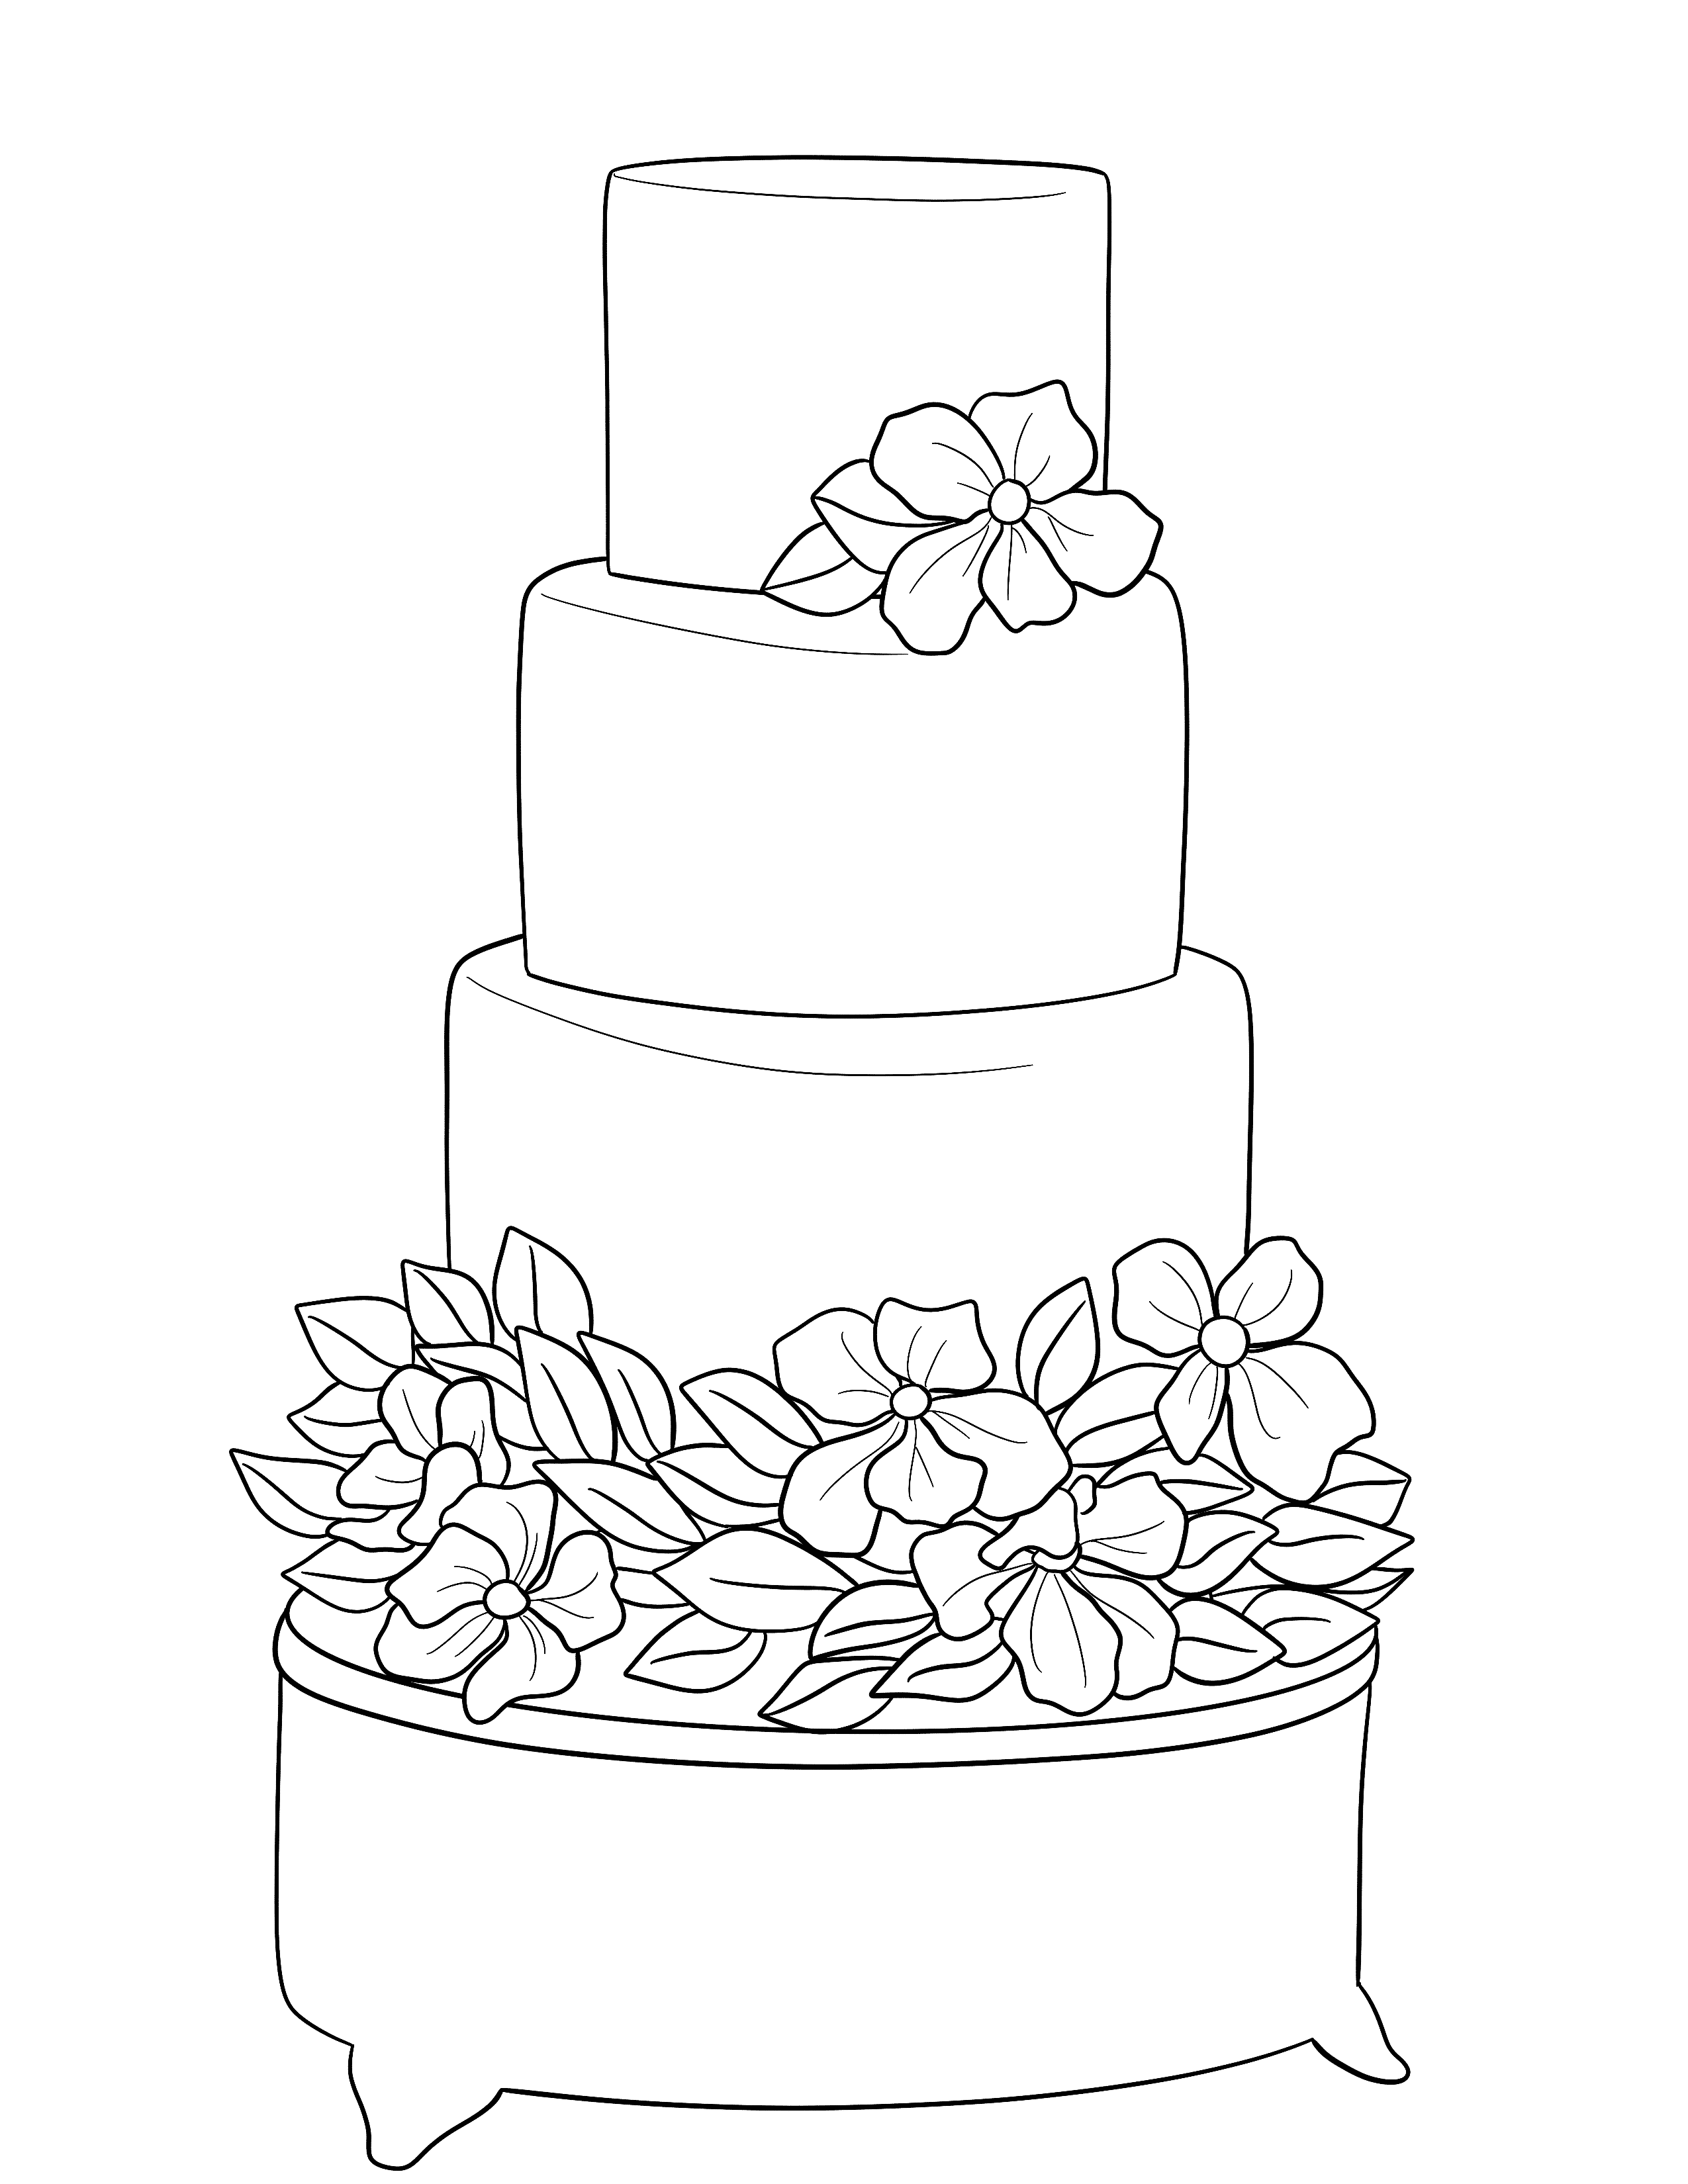 Colouring page wedding of bride and groom wedding cake